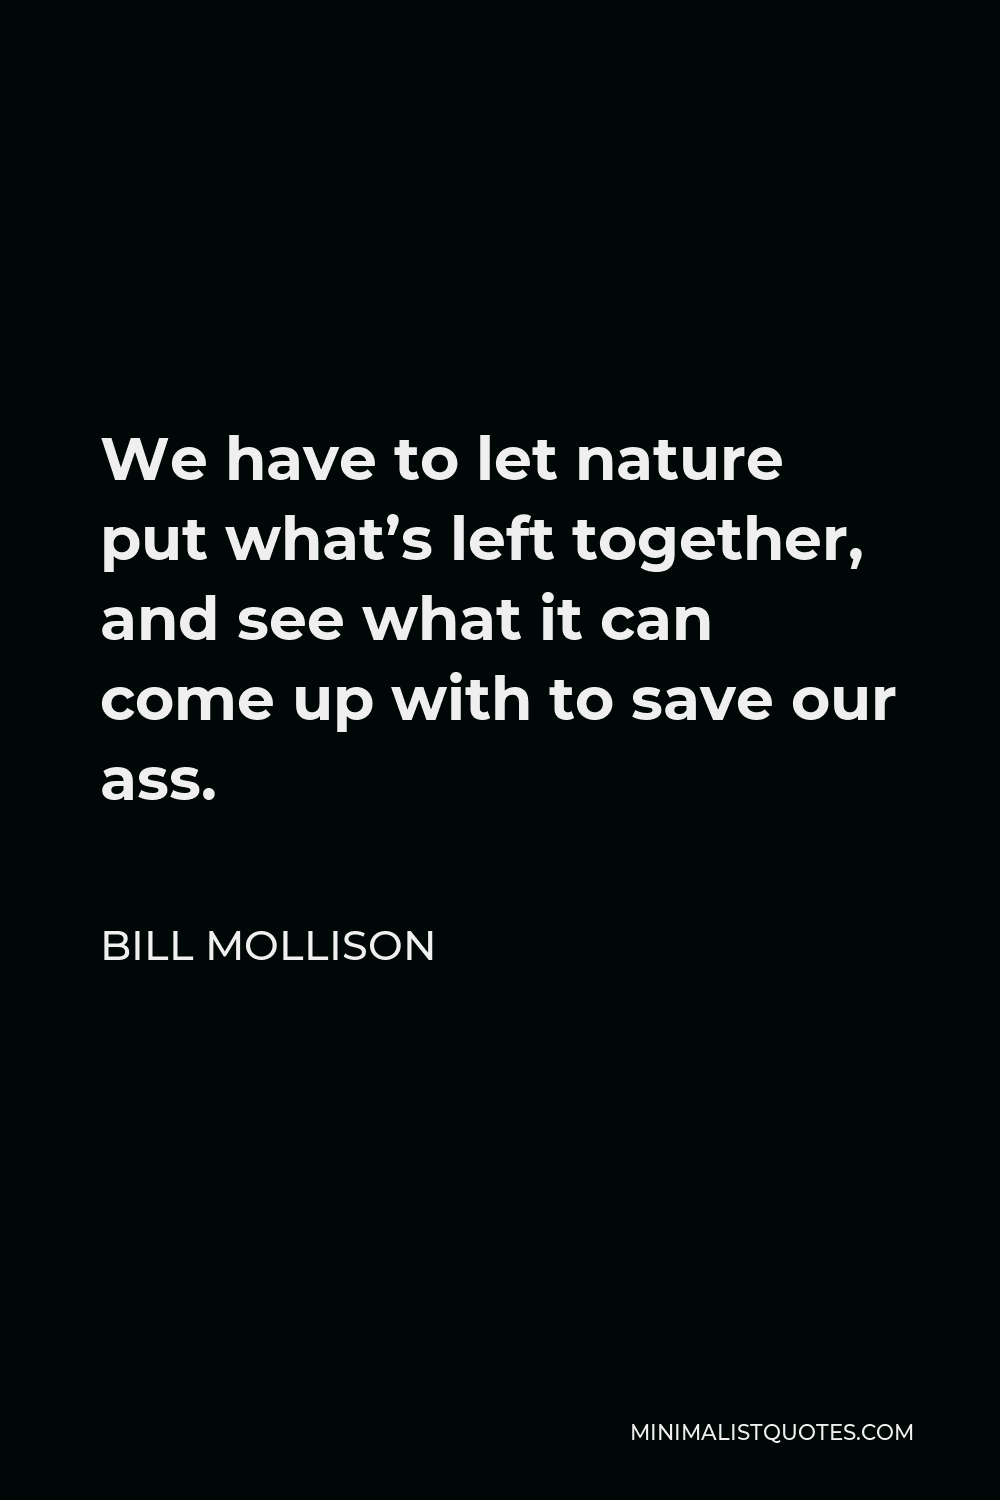 Bill Mollison Quote - We have to let nature put what’s left together, and see what it can come up with to save our ass.